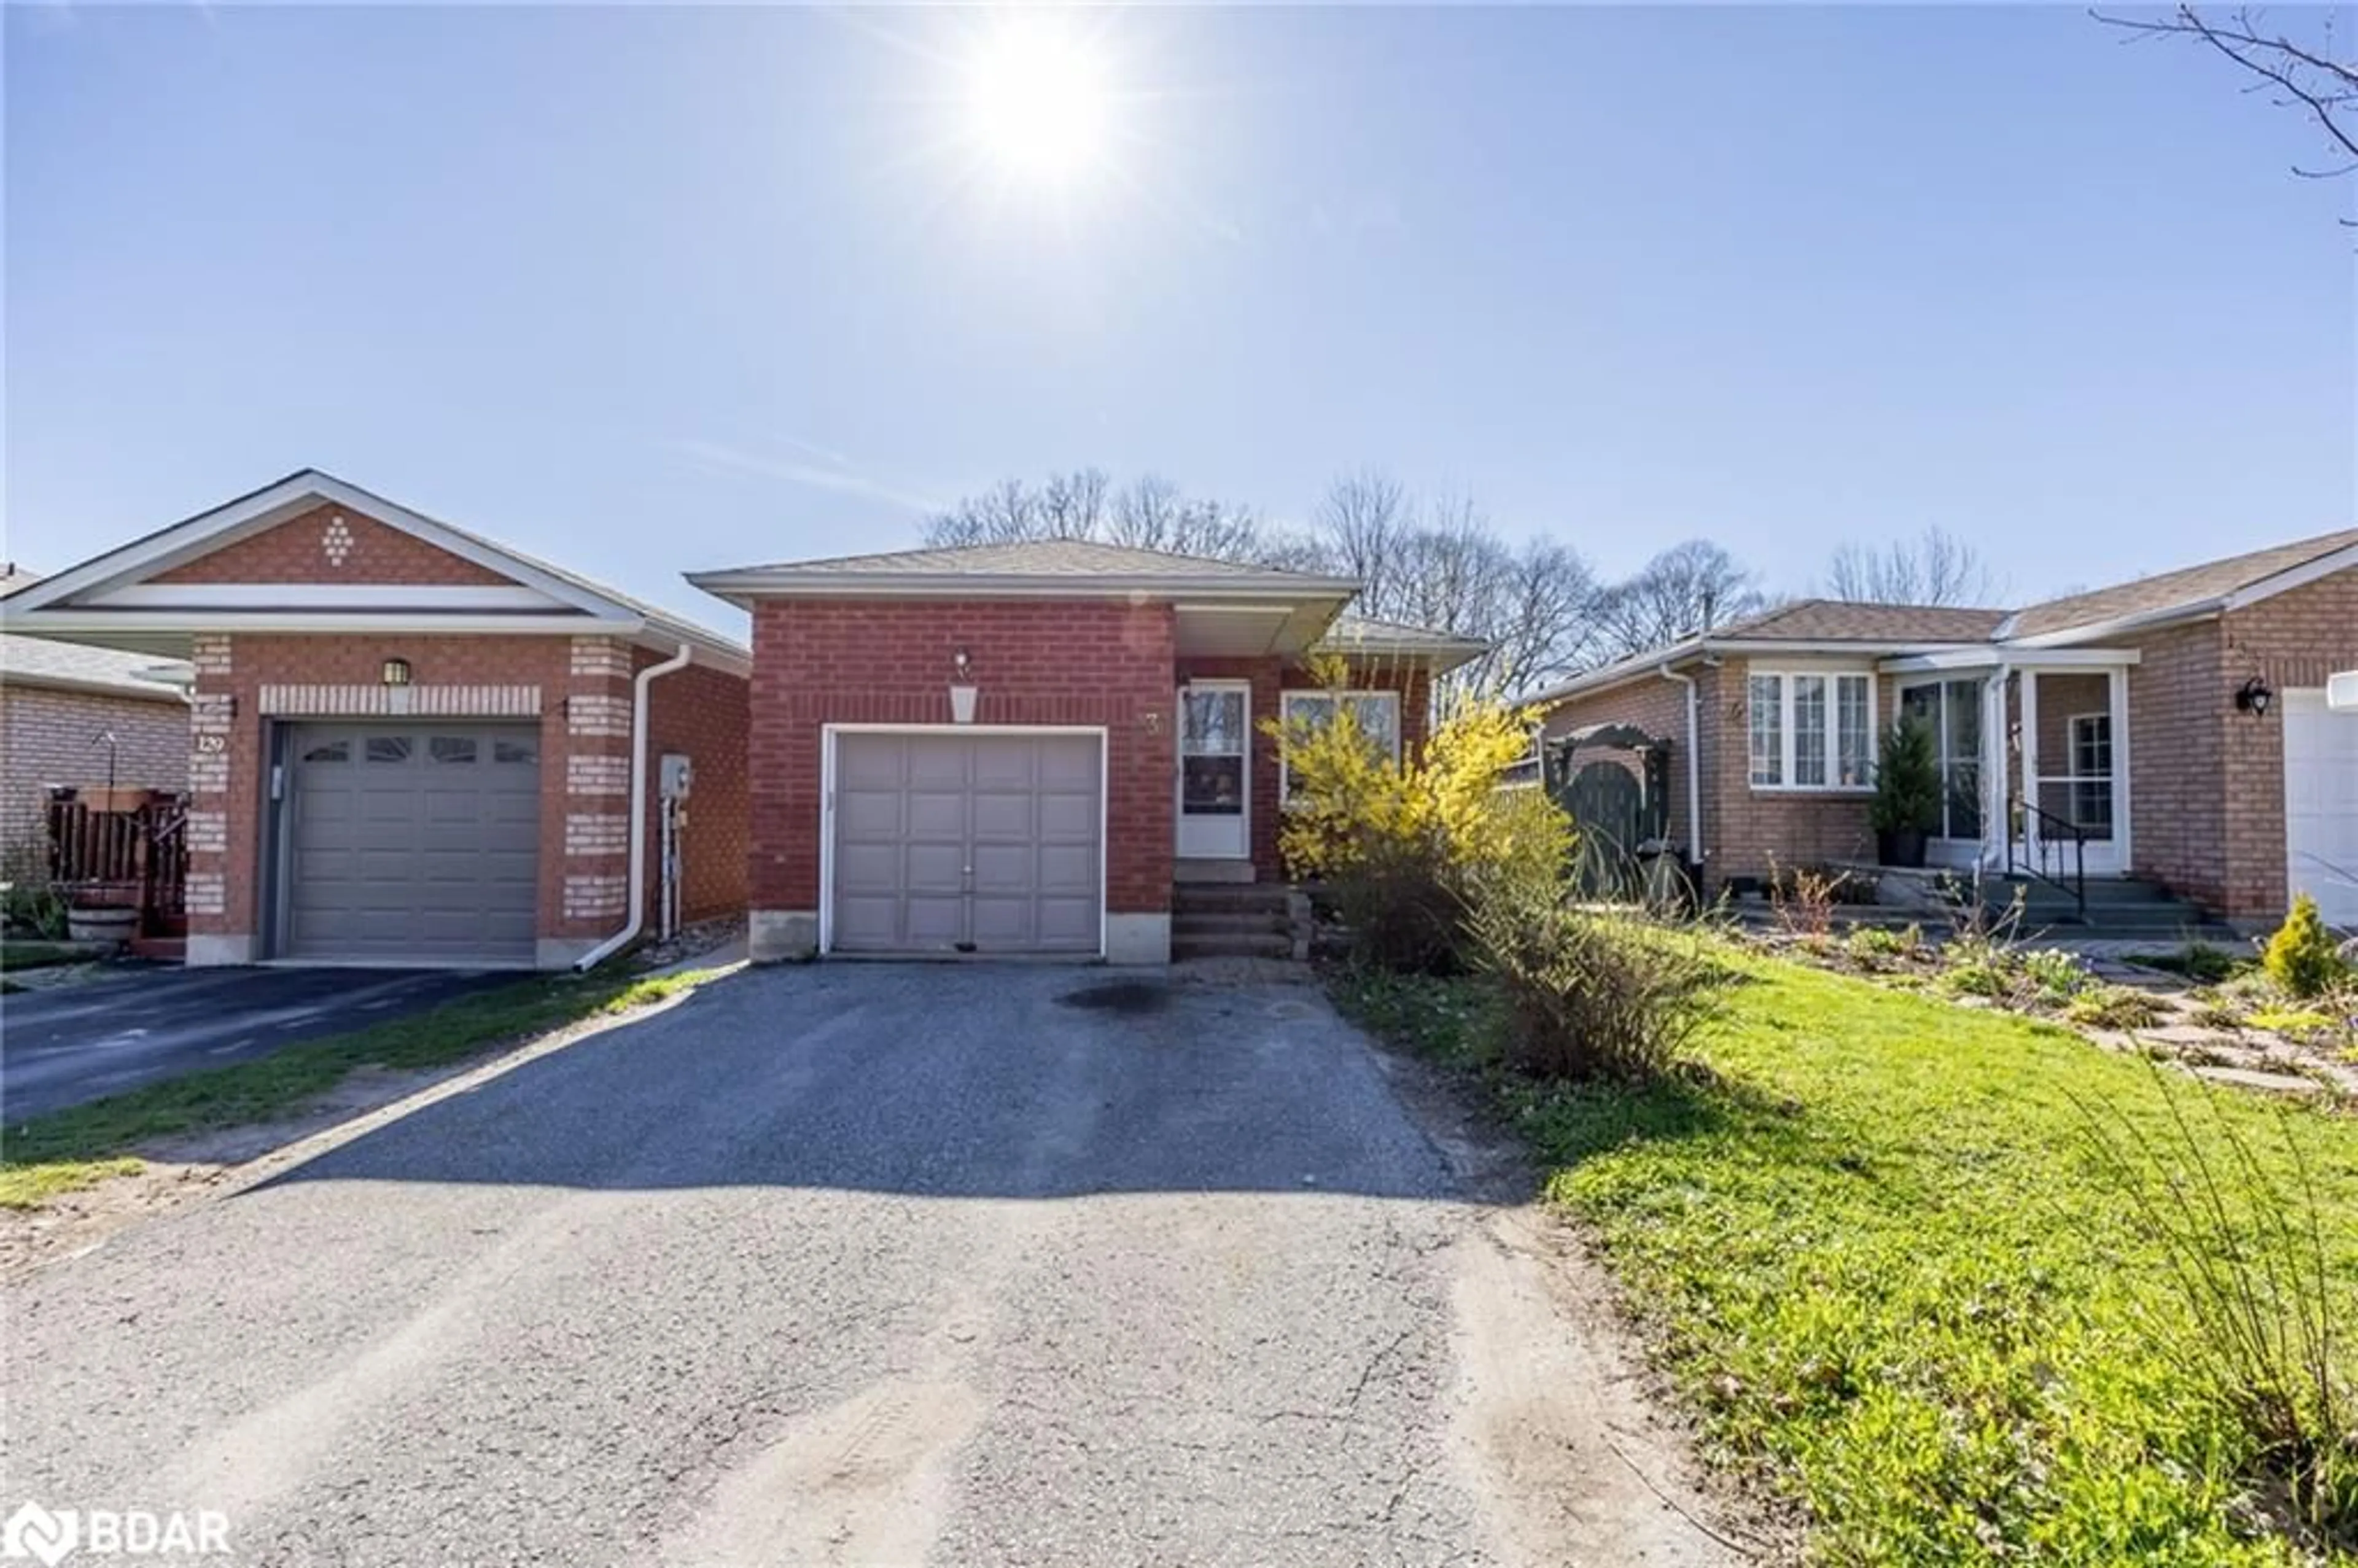 Home with brick exterior material for 131 Benson Dr, Barrie Ontario L4N 7Y4